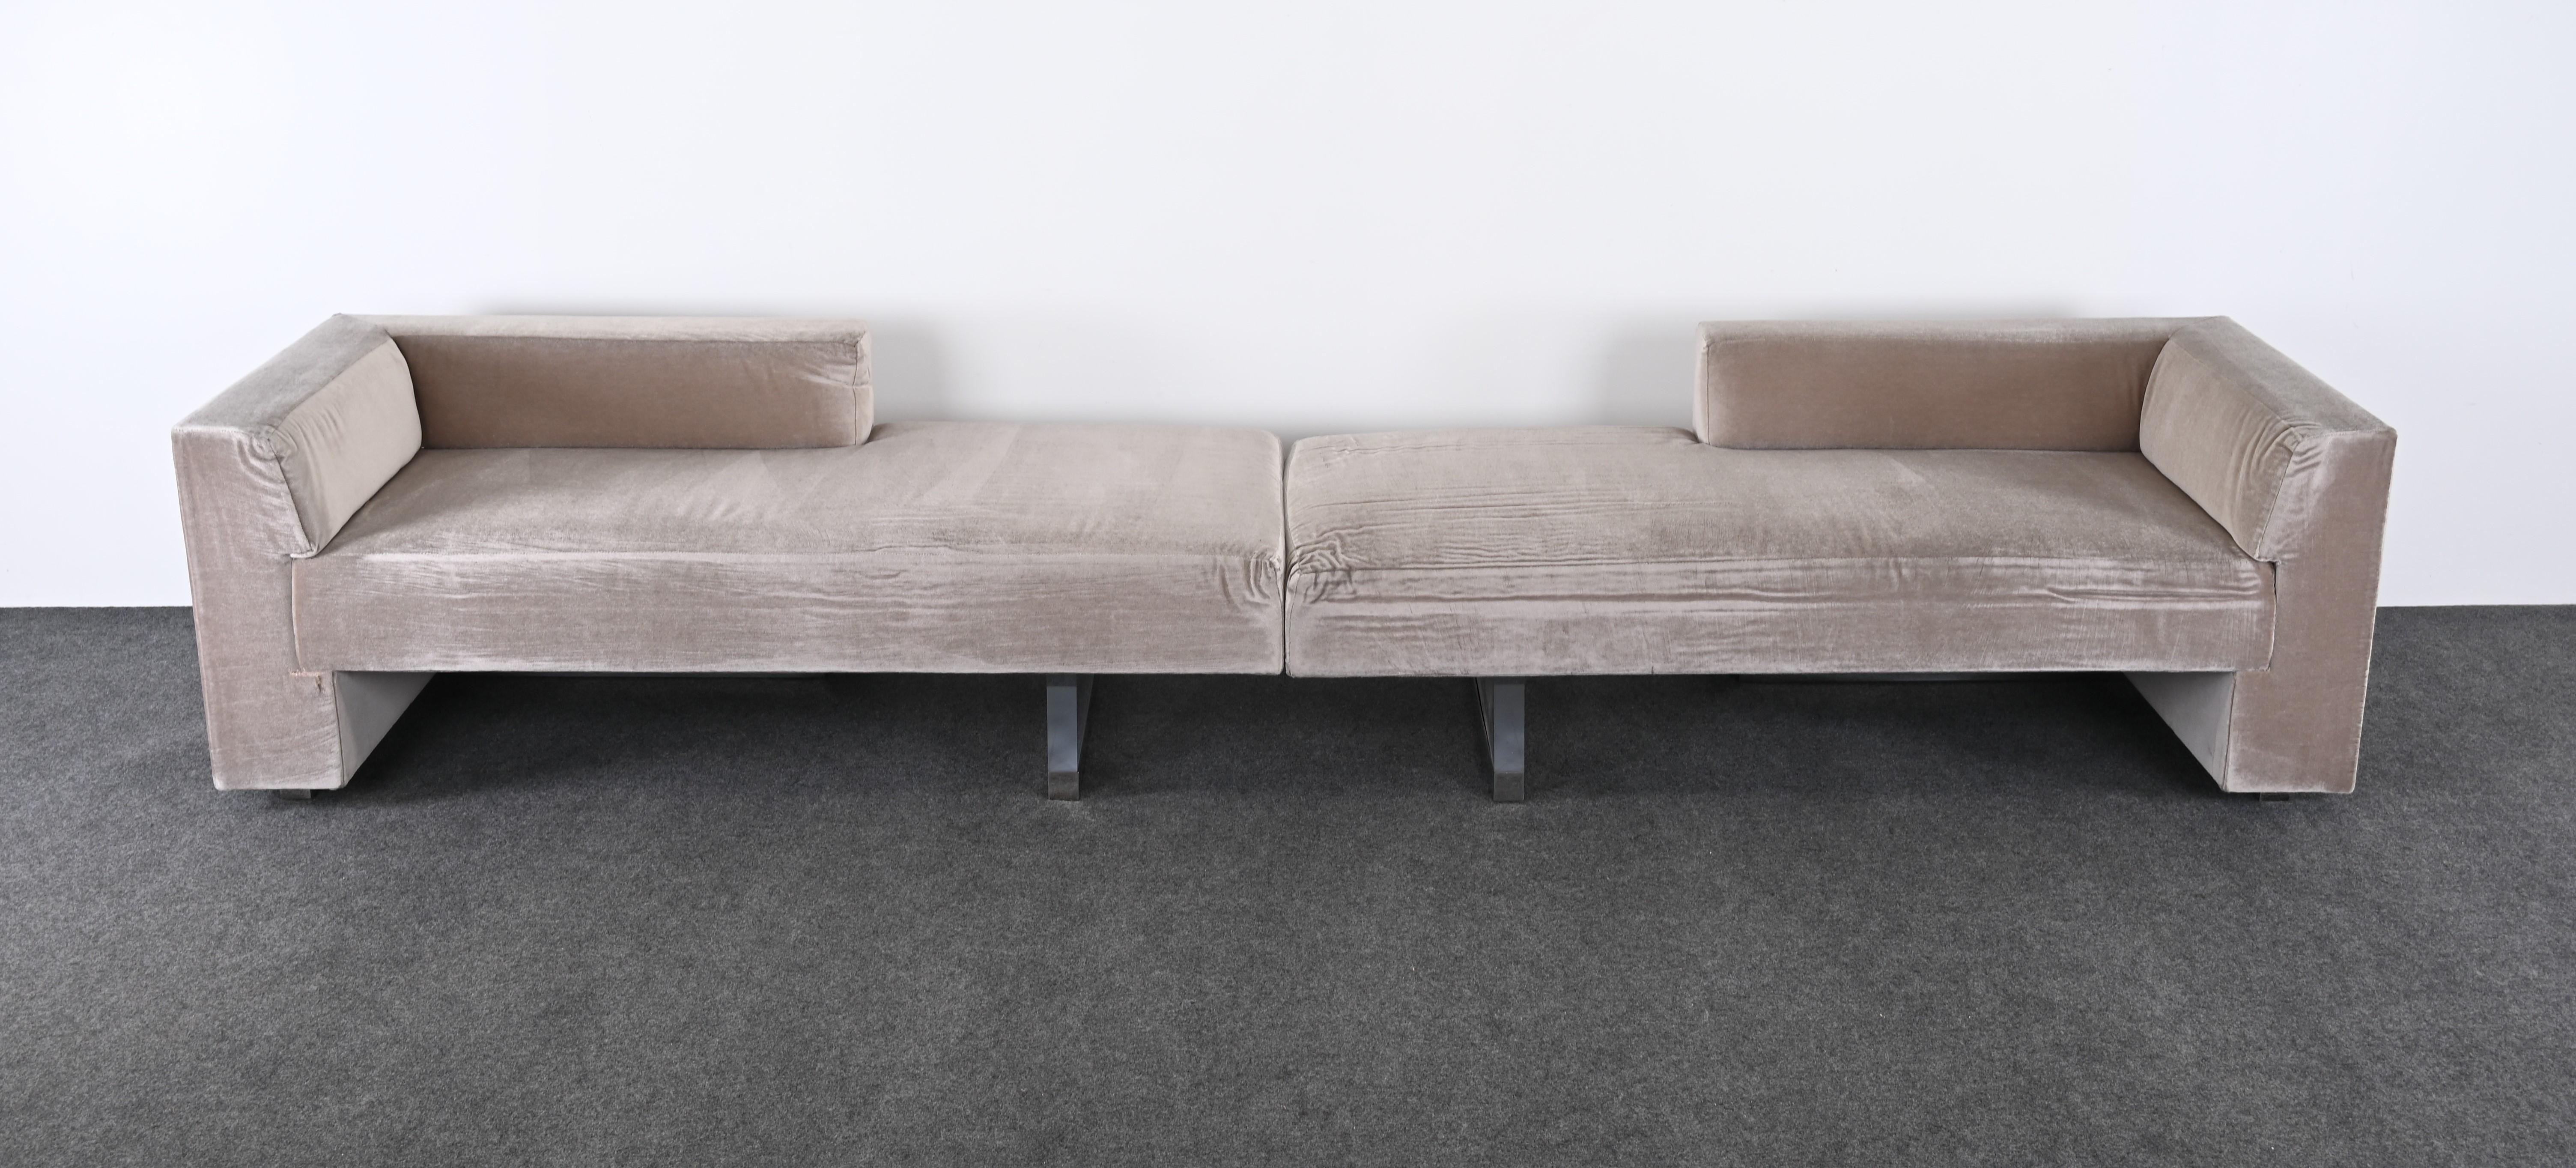 Late 20th Century Two Piece Sectional Sofas by Vladimir Kagan for Gucci, 1990s